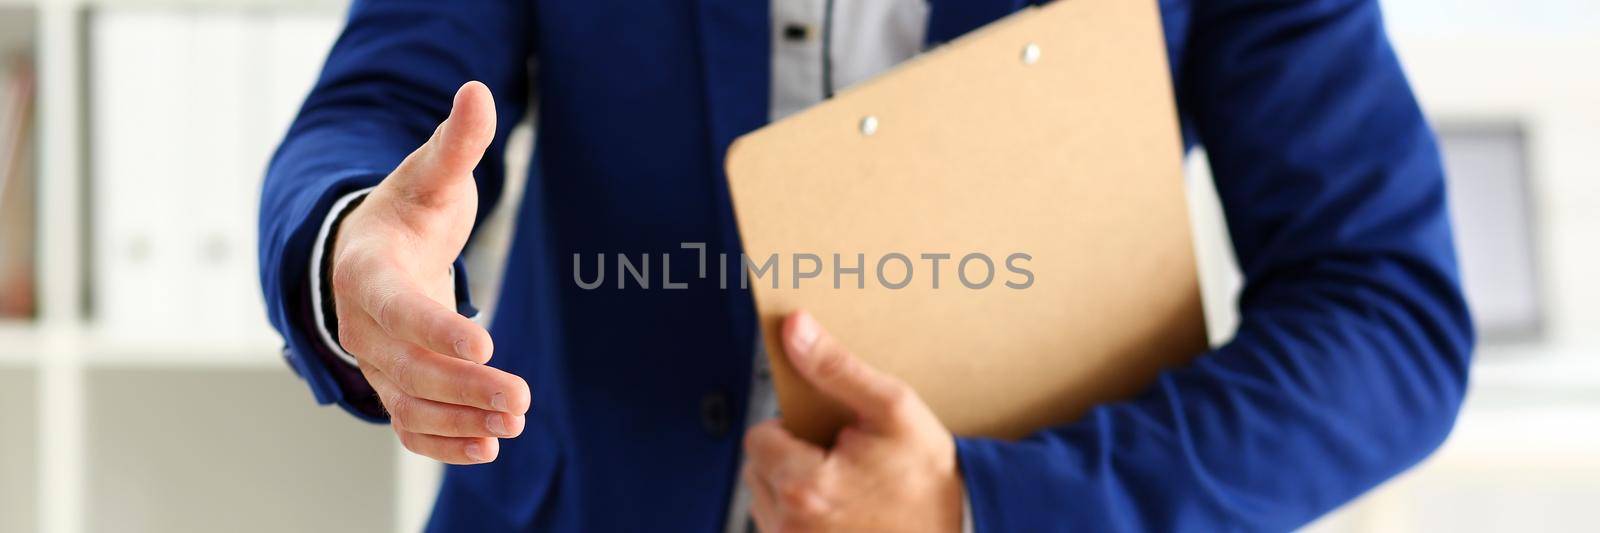 Businessman offer hand to shake as hello in office closeup. Serious business, friendly support service, excellent prospect, introduction or thanks gesture, gratitude, invite to participate concept